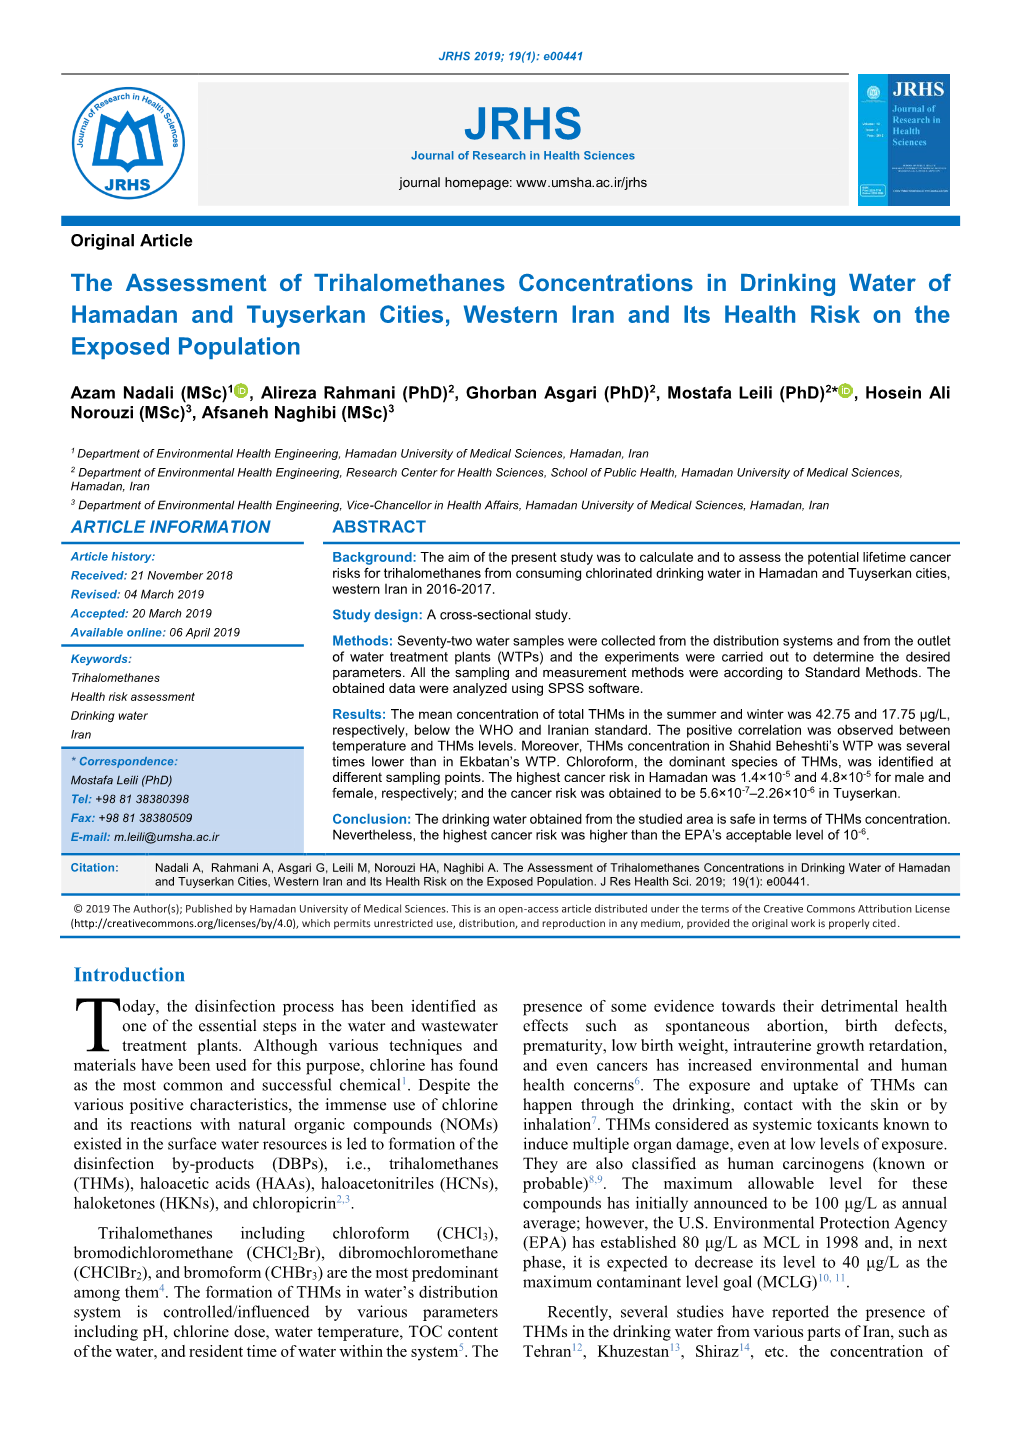 The Assessment of Trihalomethanes Concentrations in Drinking Water of Hamadan and Tuyserkan Cities, Western Iran and Its Health Risk on the Exposed Population